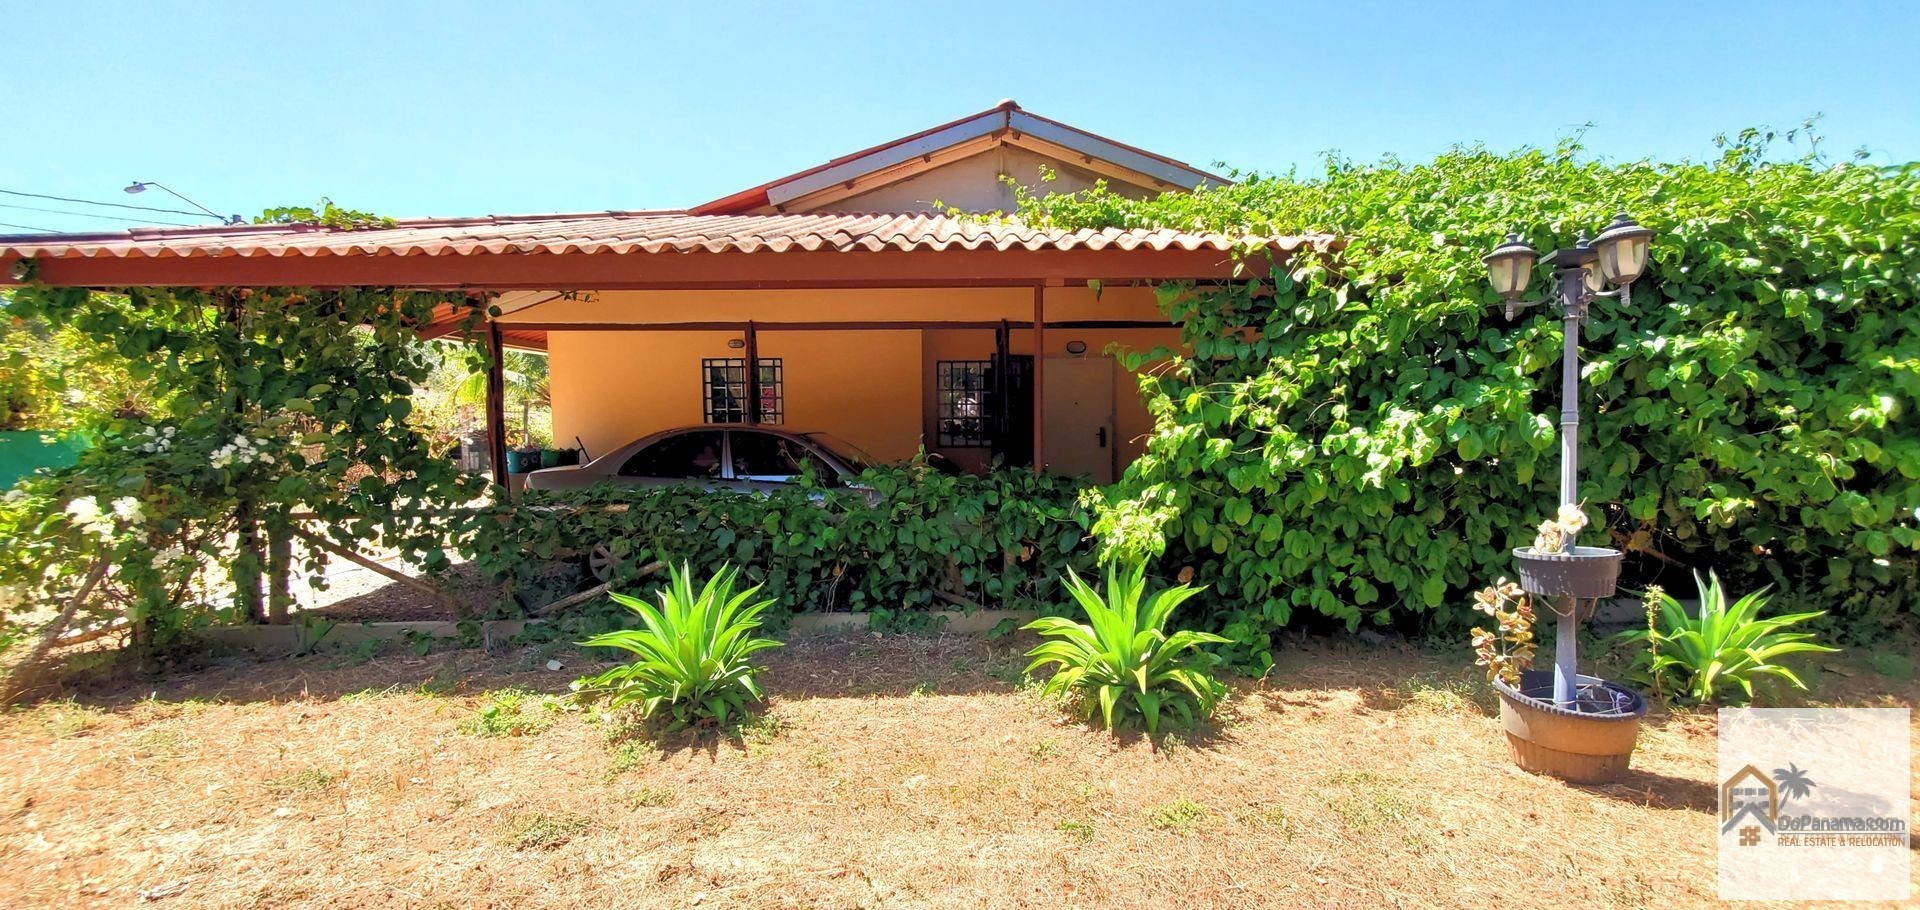 Private 2-Bedroom House in Pedasi, Panama - Quiet Road, No HOAs - Property ID PLS-18563